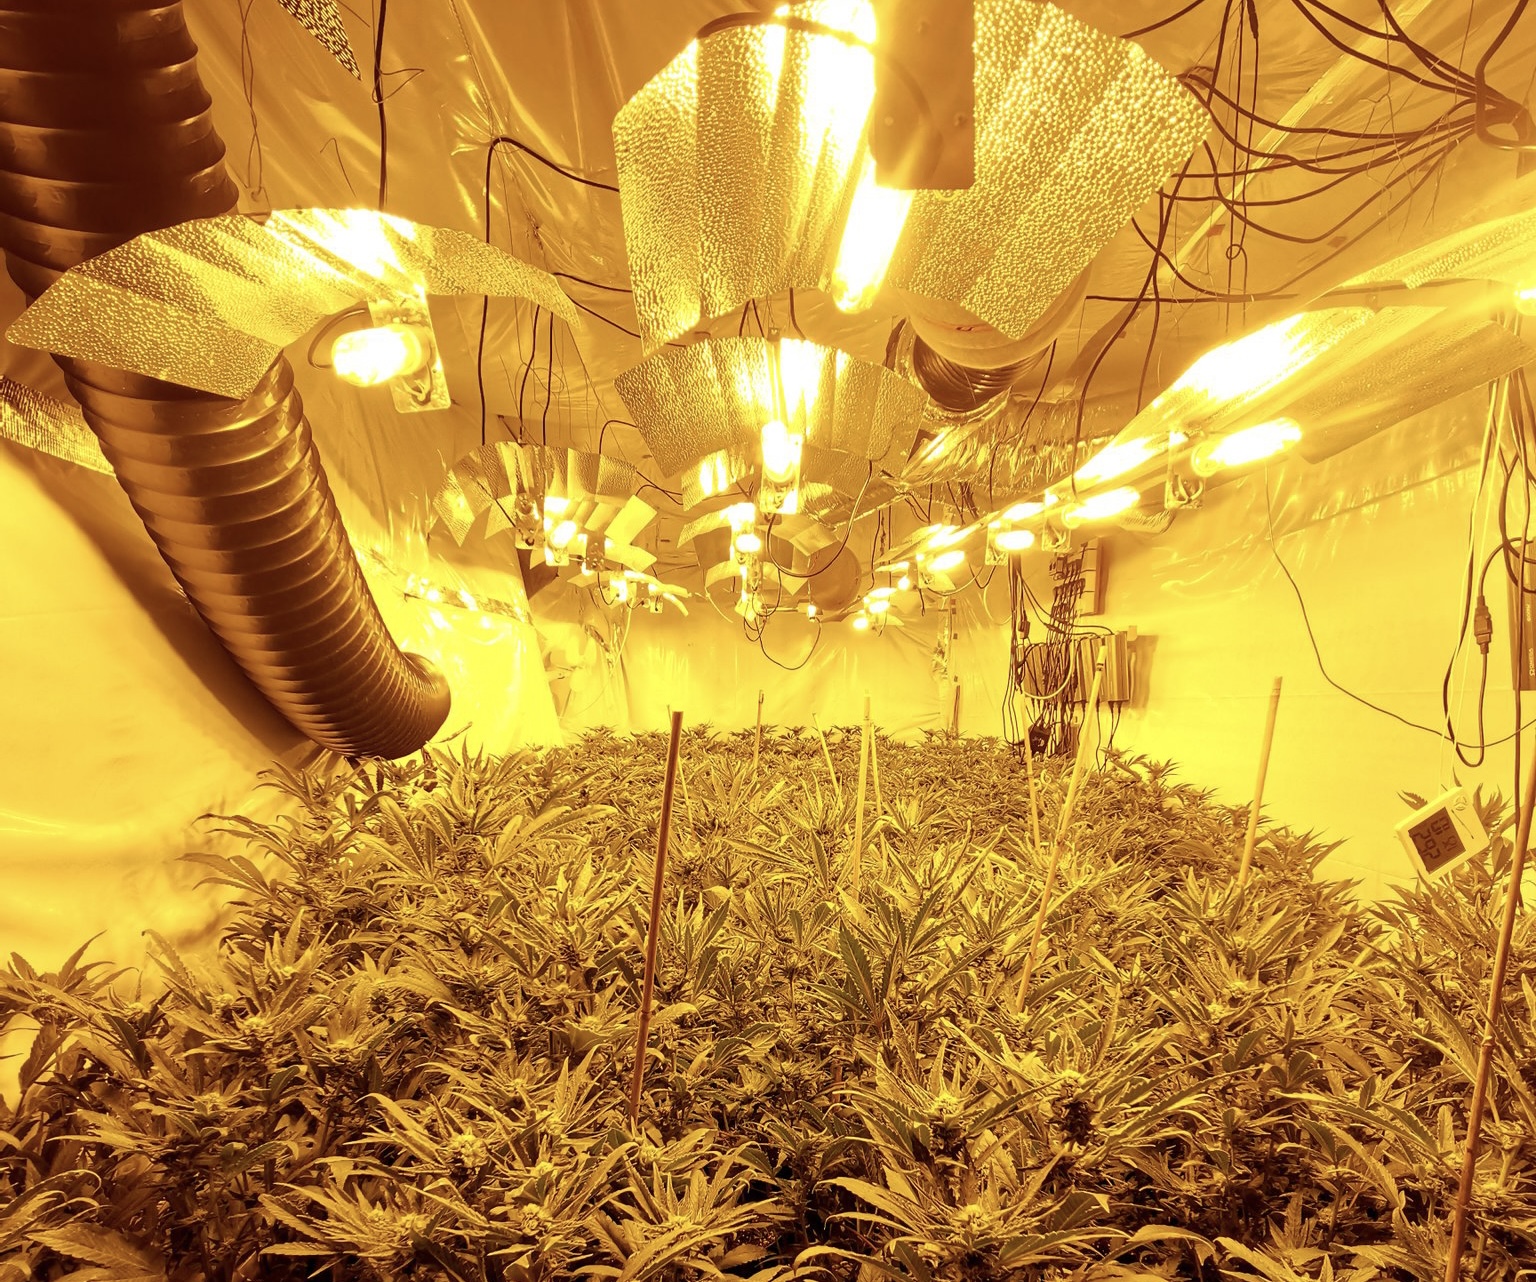 NEWS | Police discover cannabis farm with an estimated £250,000 worth of cannabis recovered